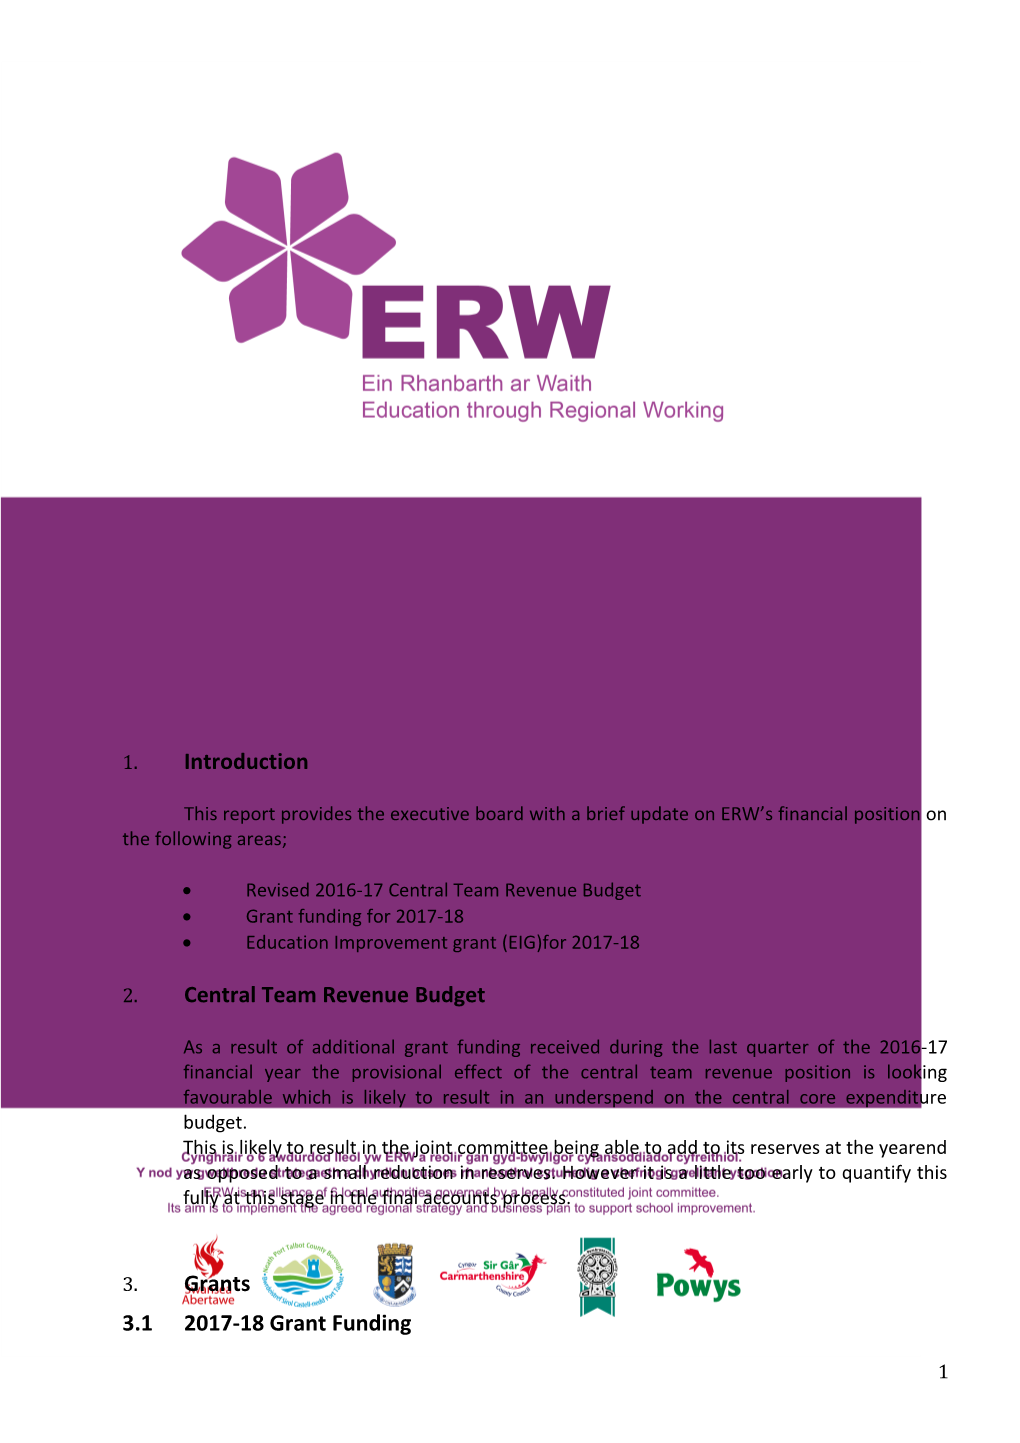 This Report Provides the Executive Board with a Brief Update on ERW S Financial Position